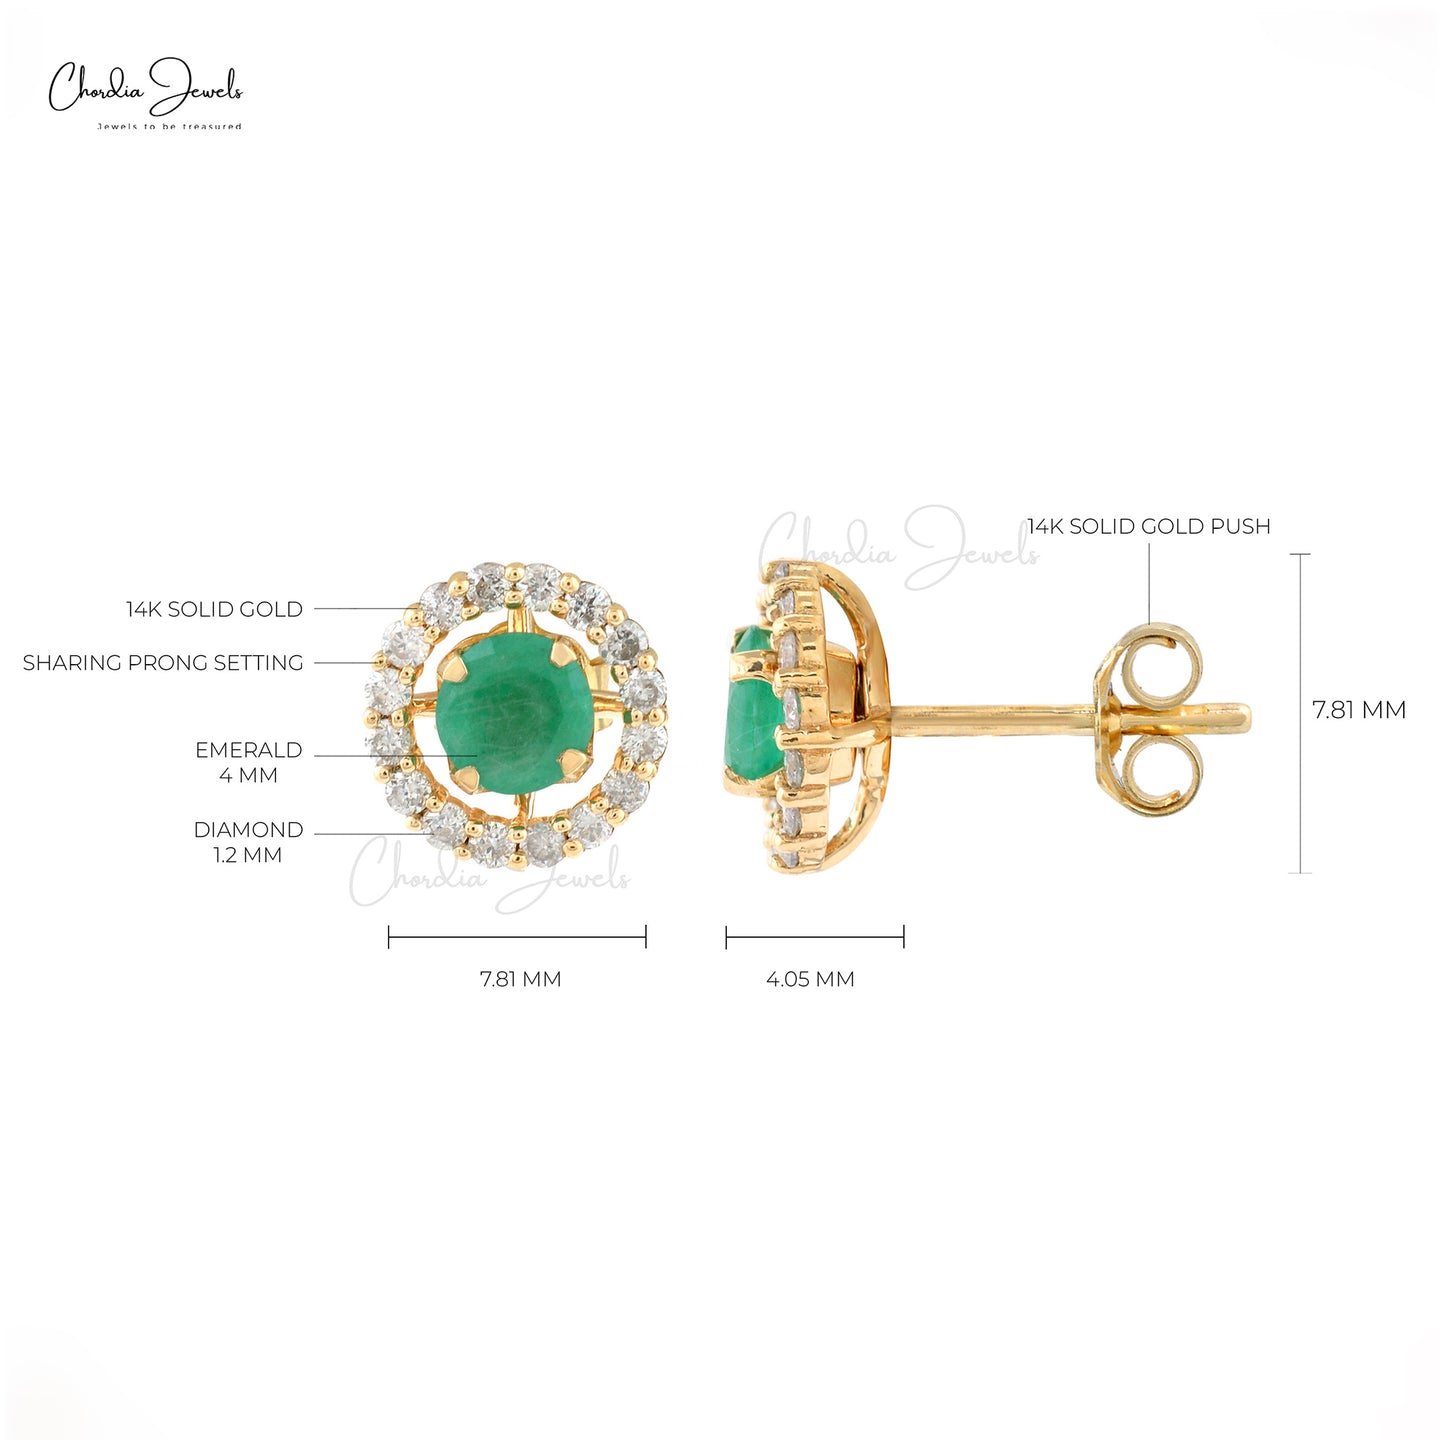 Load image into Gallery viewer, Real Emerald Detachable Earrings 4mm Brilliant Round Cut Gemstone Studs 14k Solid Yellow Gold Minimal Fine Jewelry For Daughter
